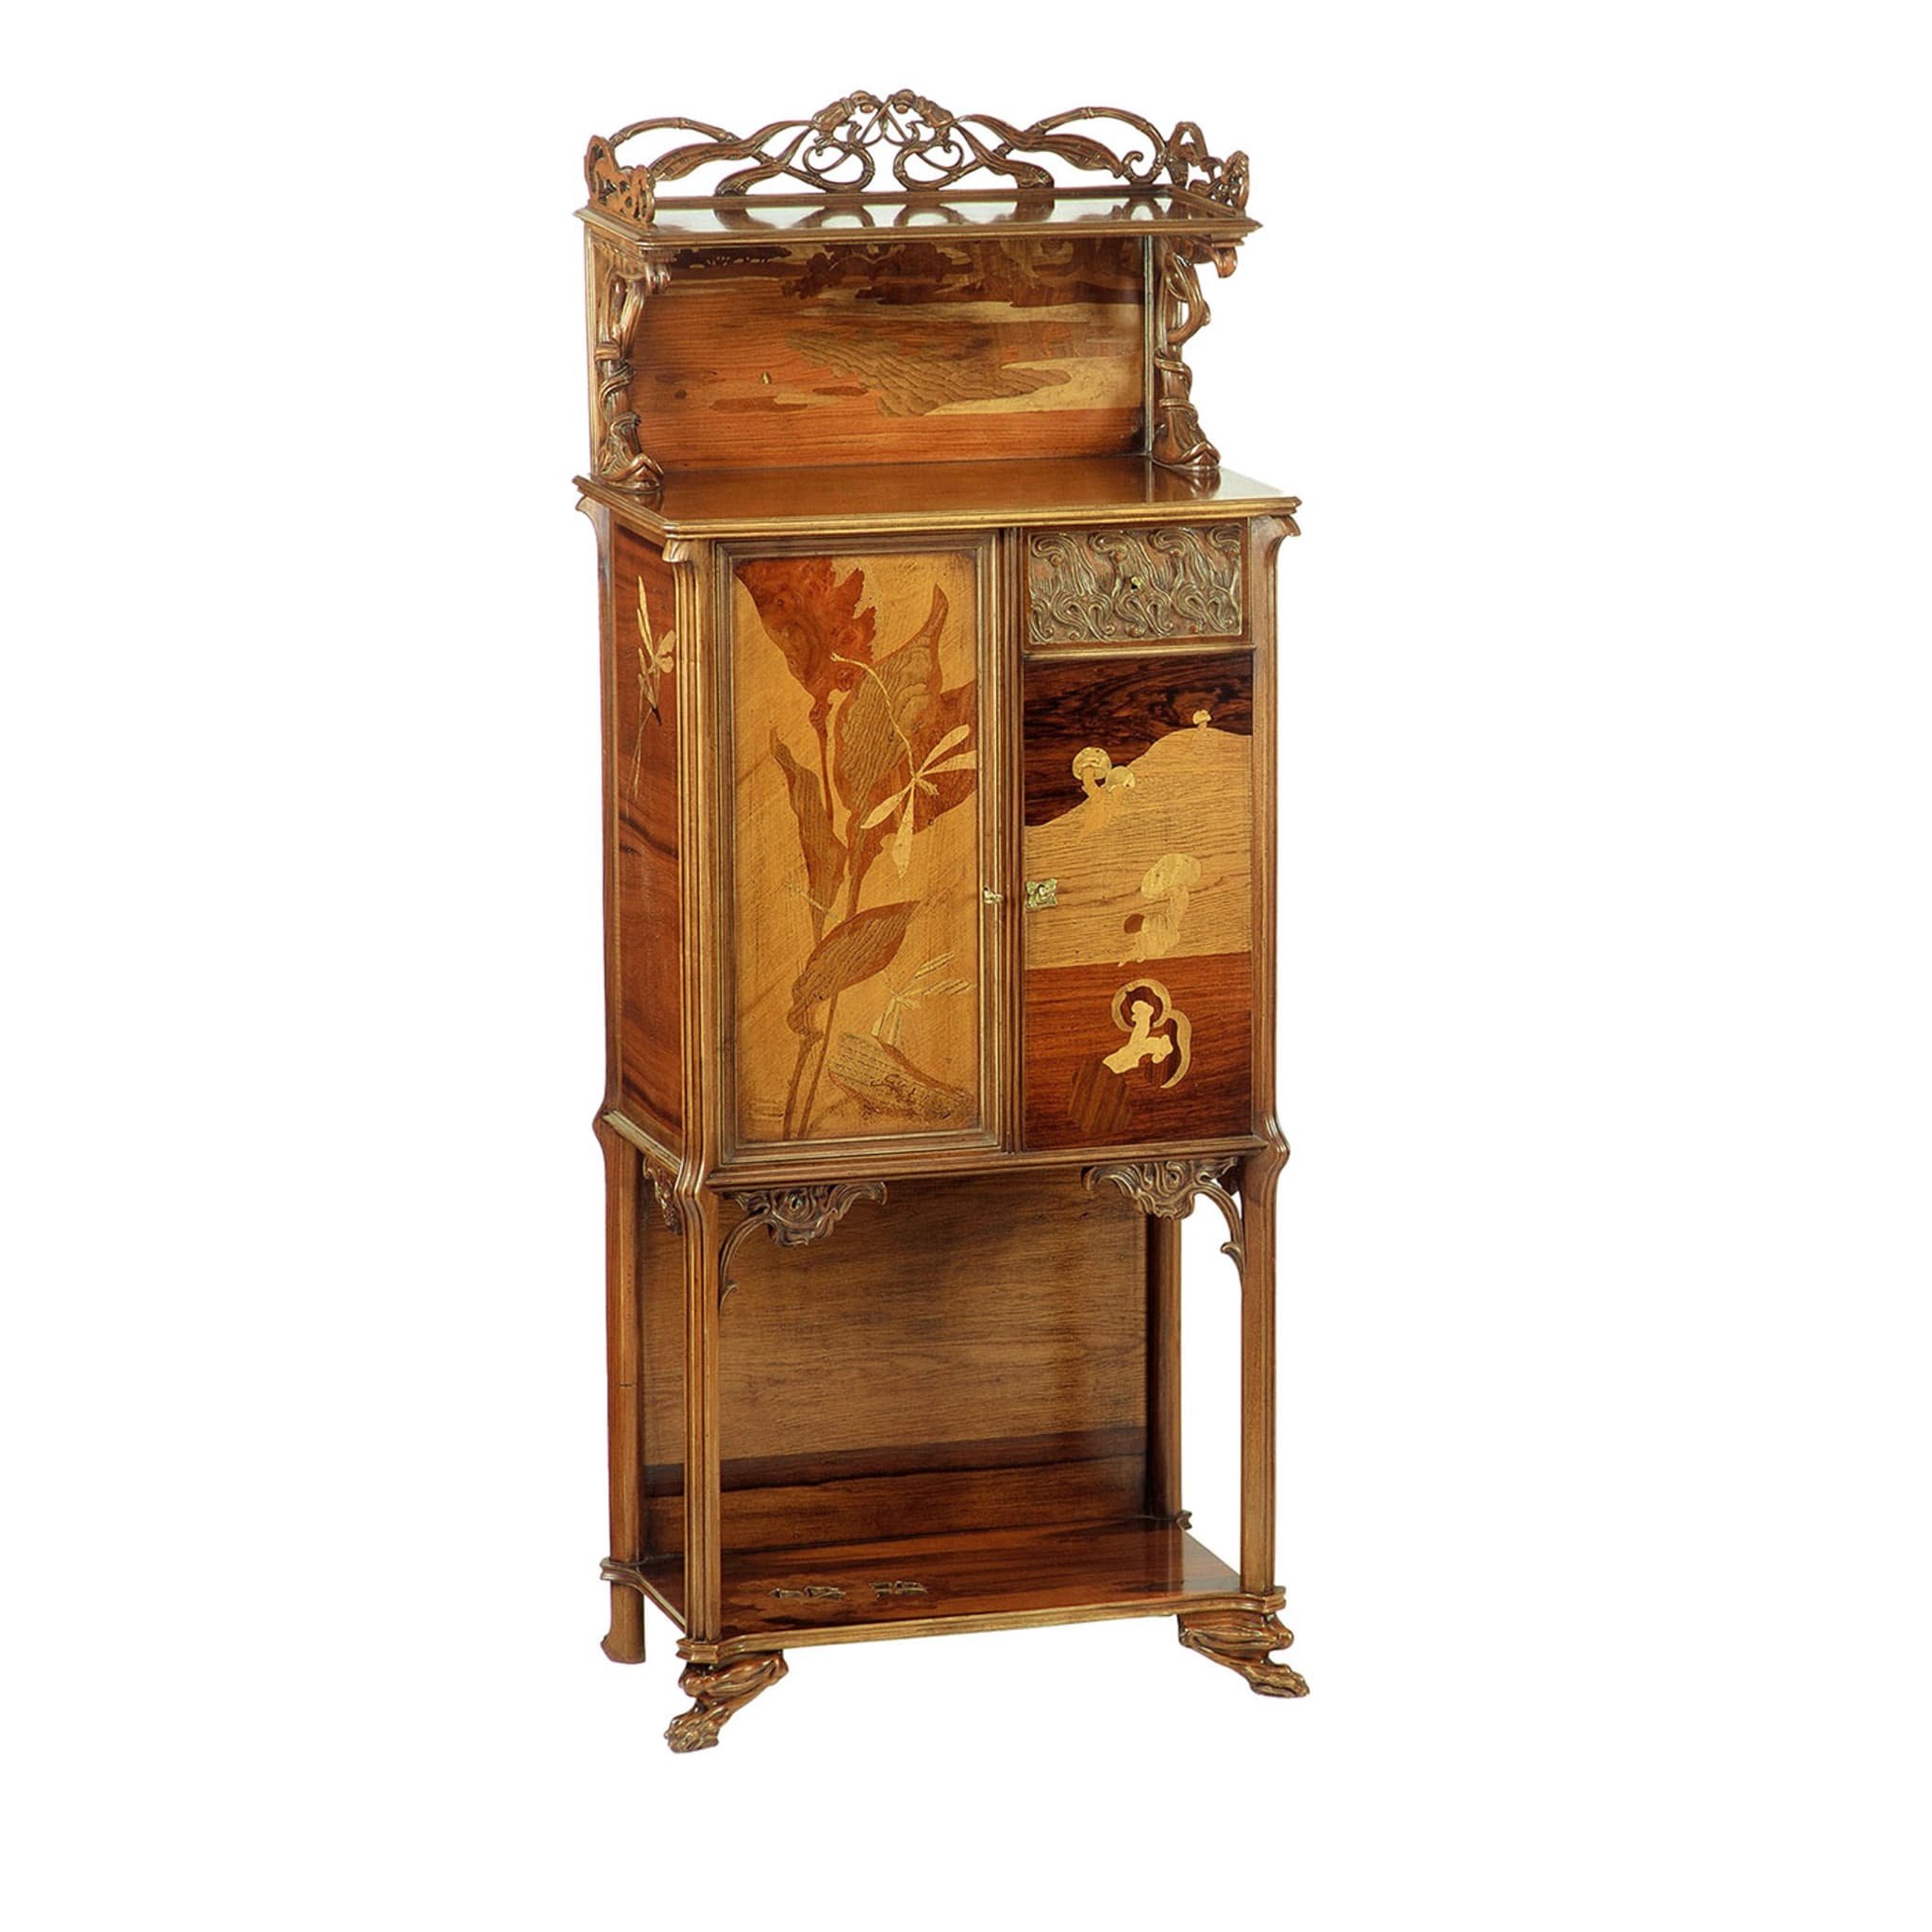 French Art Nouveau-Style Inlaid Cabinet by Emile Gallè - Main view